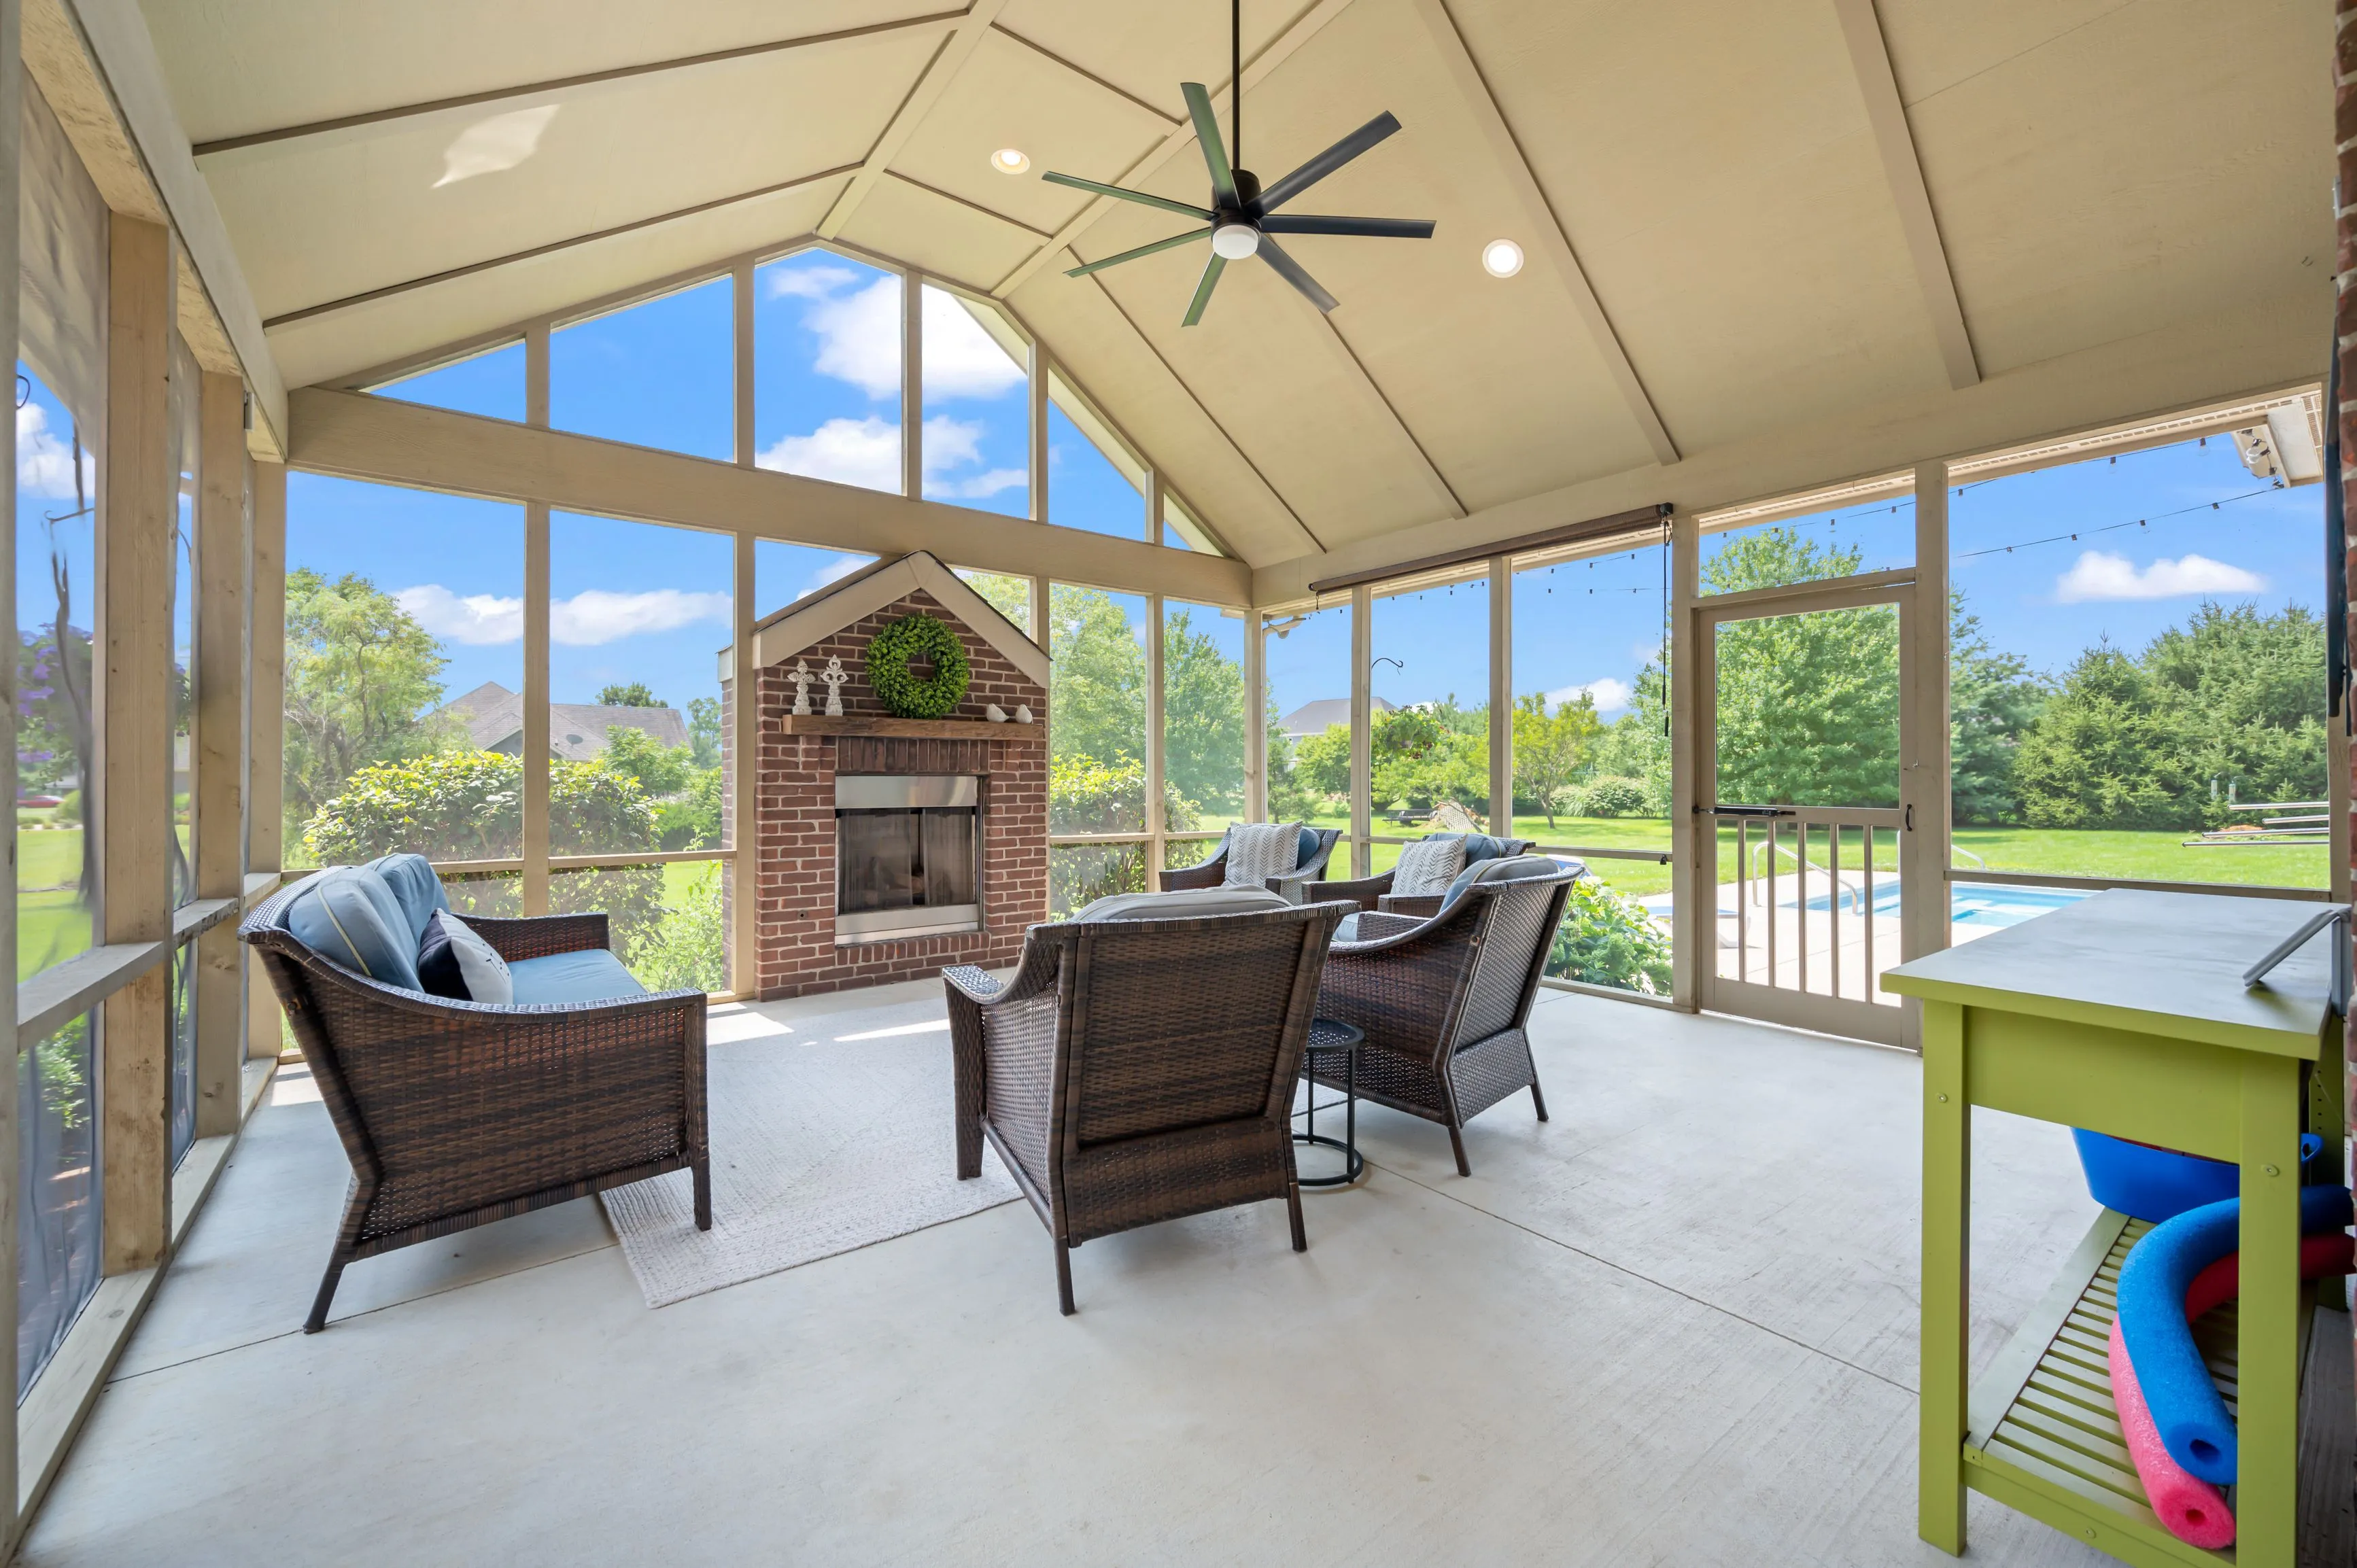 Screened porch with outdoor furniture and a view of the backyard.